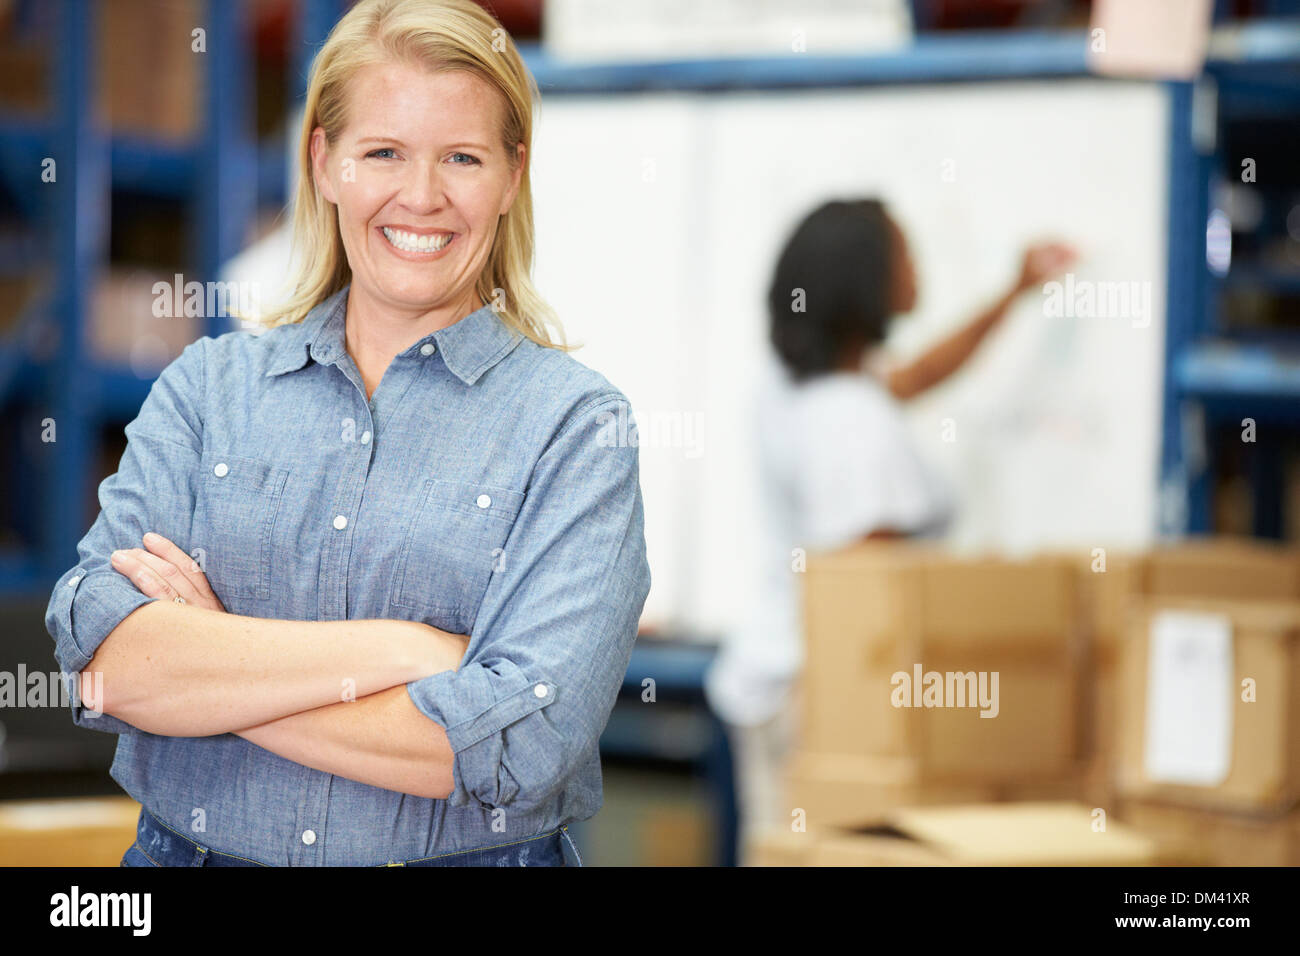 Portrait Of Worker In Distribution Warehouse Stock Photo